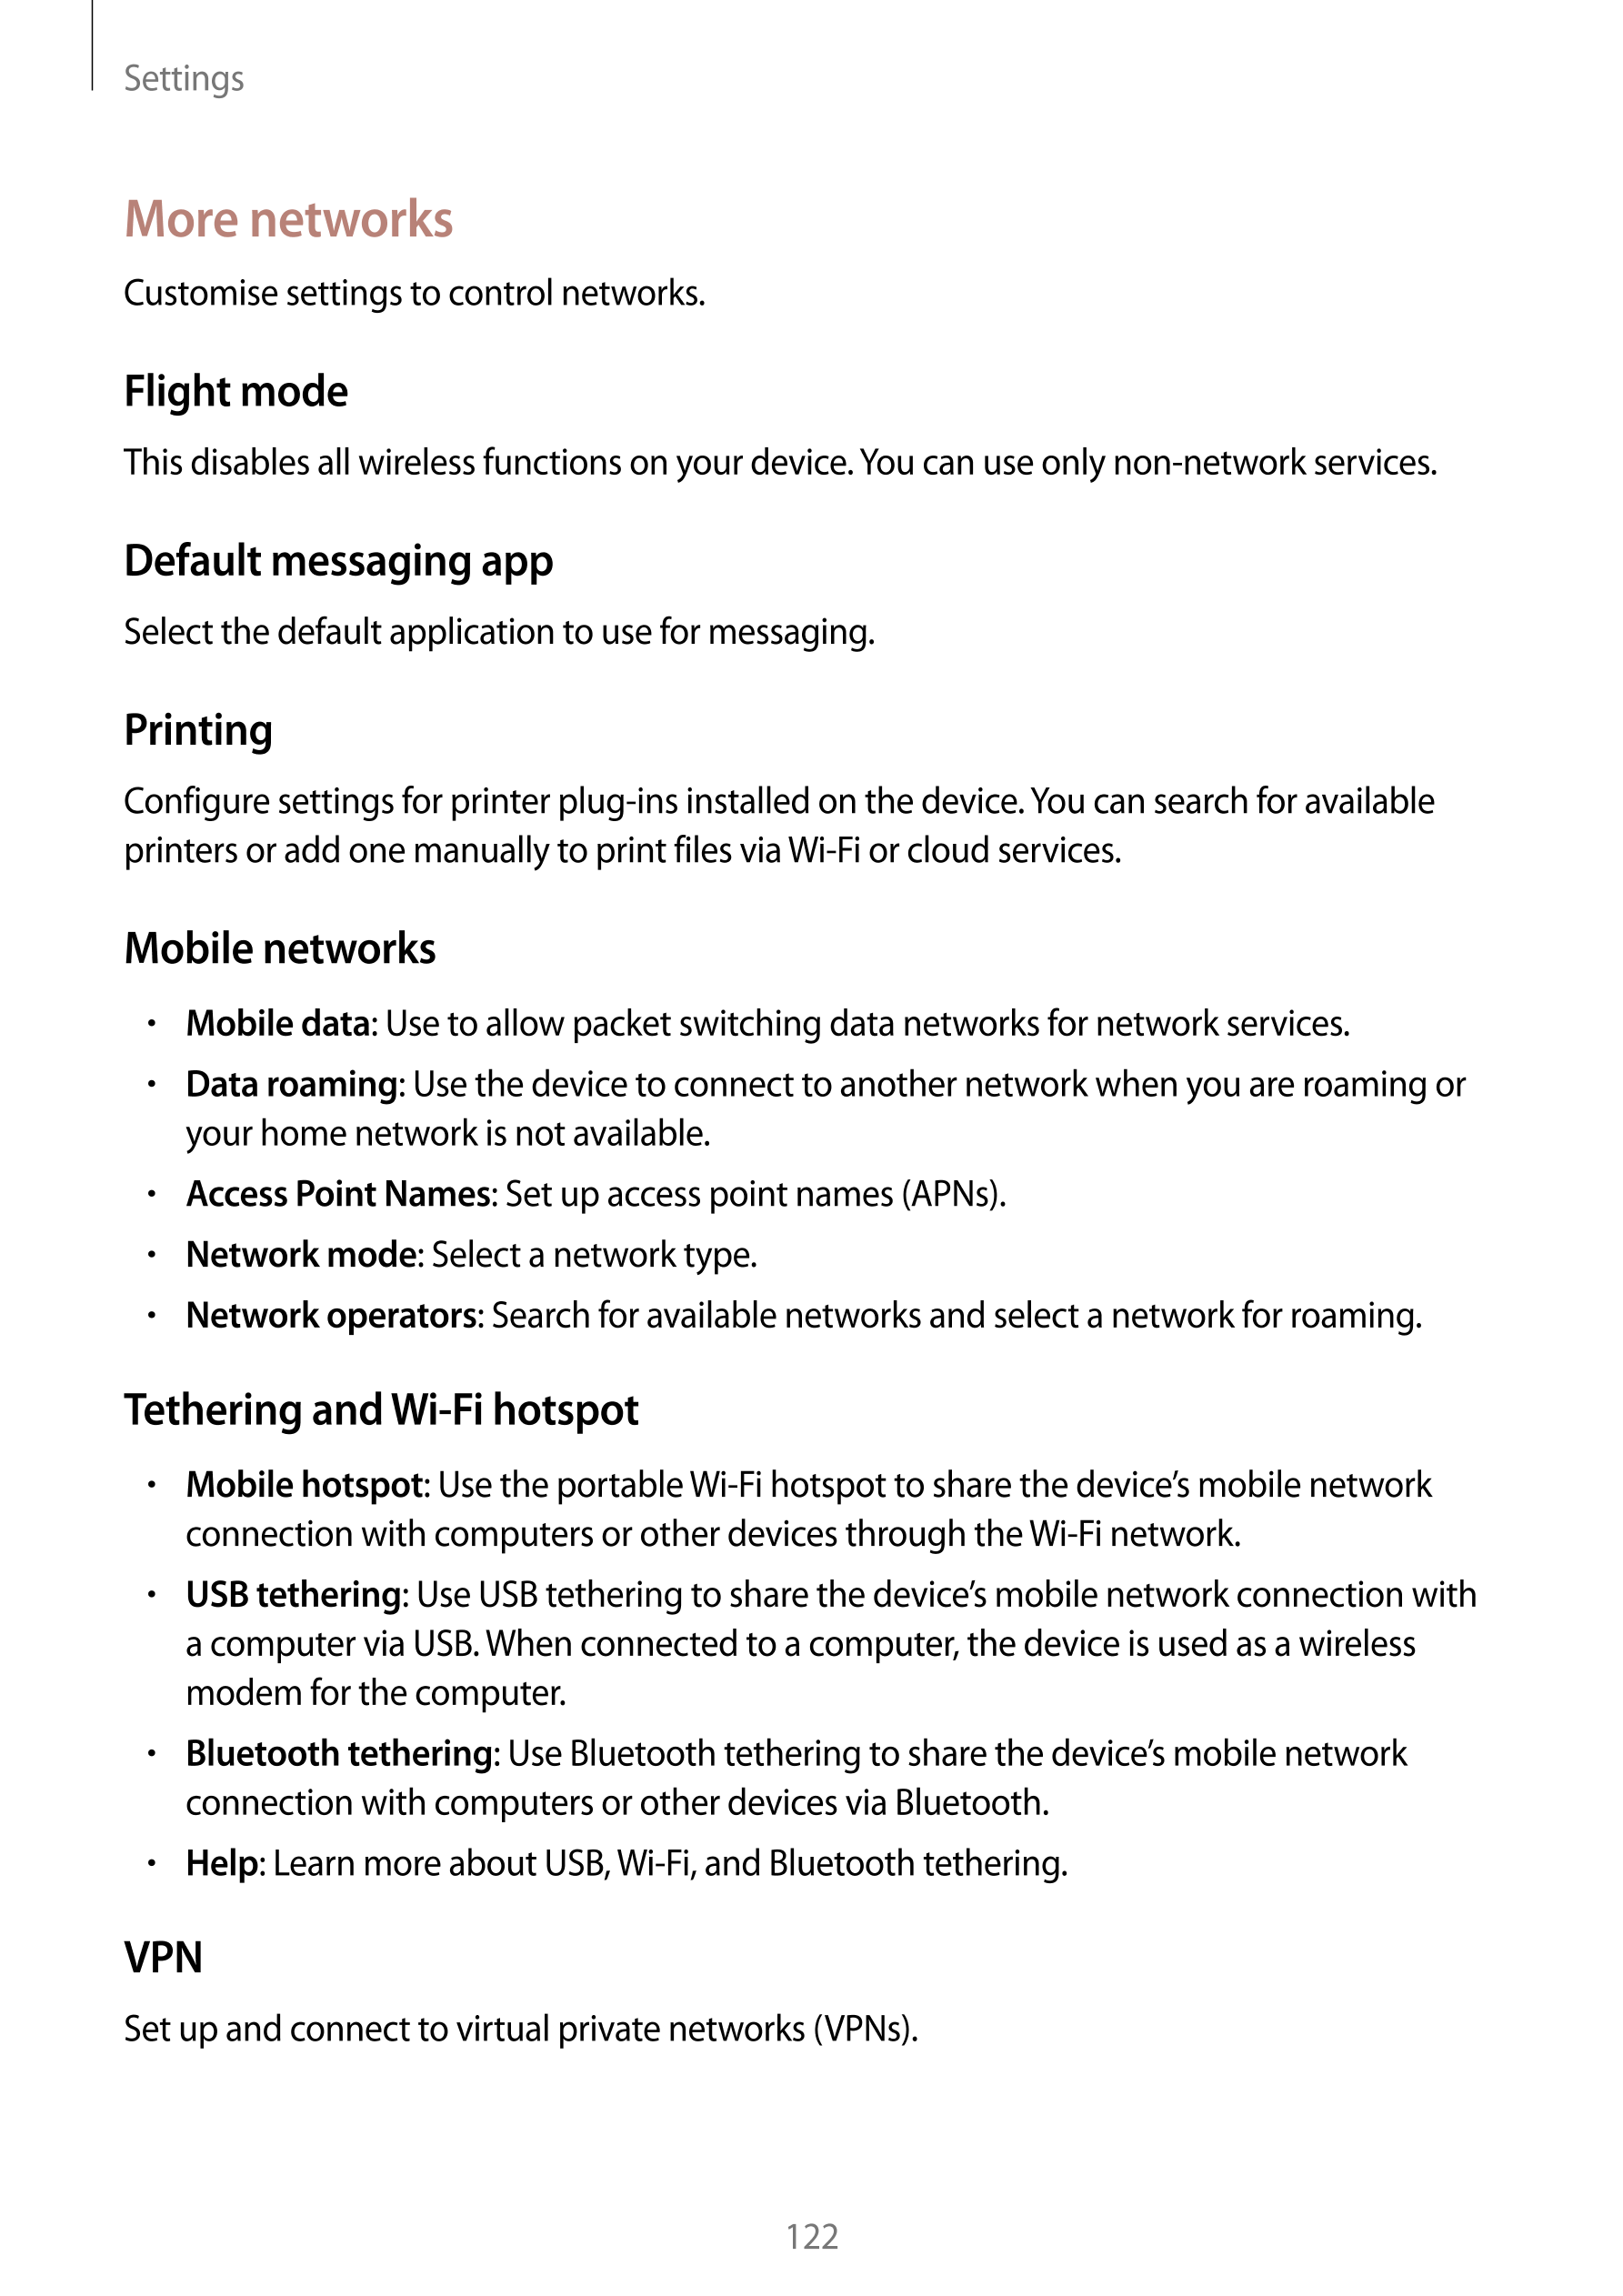 Settings
More networks
Customise settings to control networks.
Flight mode
This disables all wireless functions on your device. 